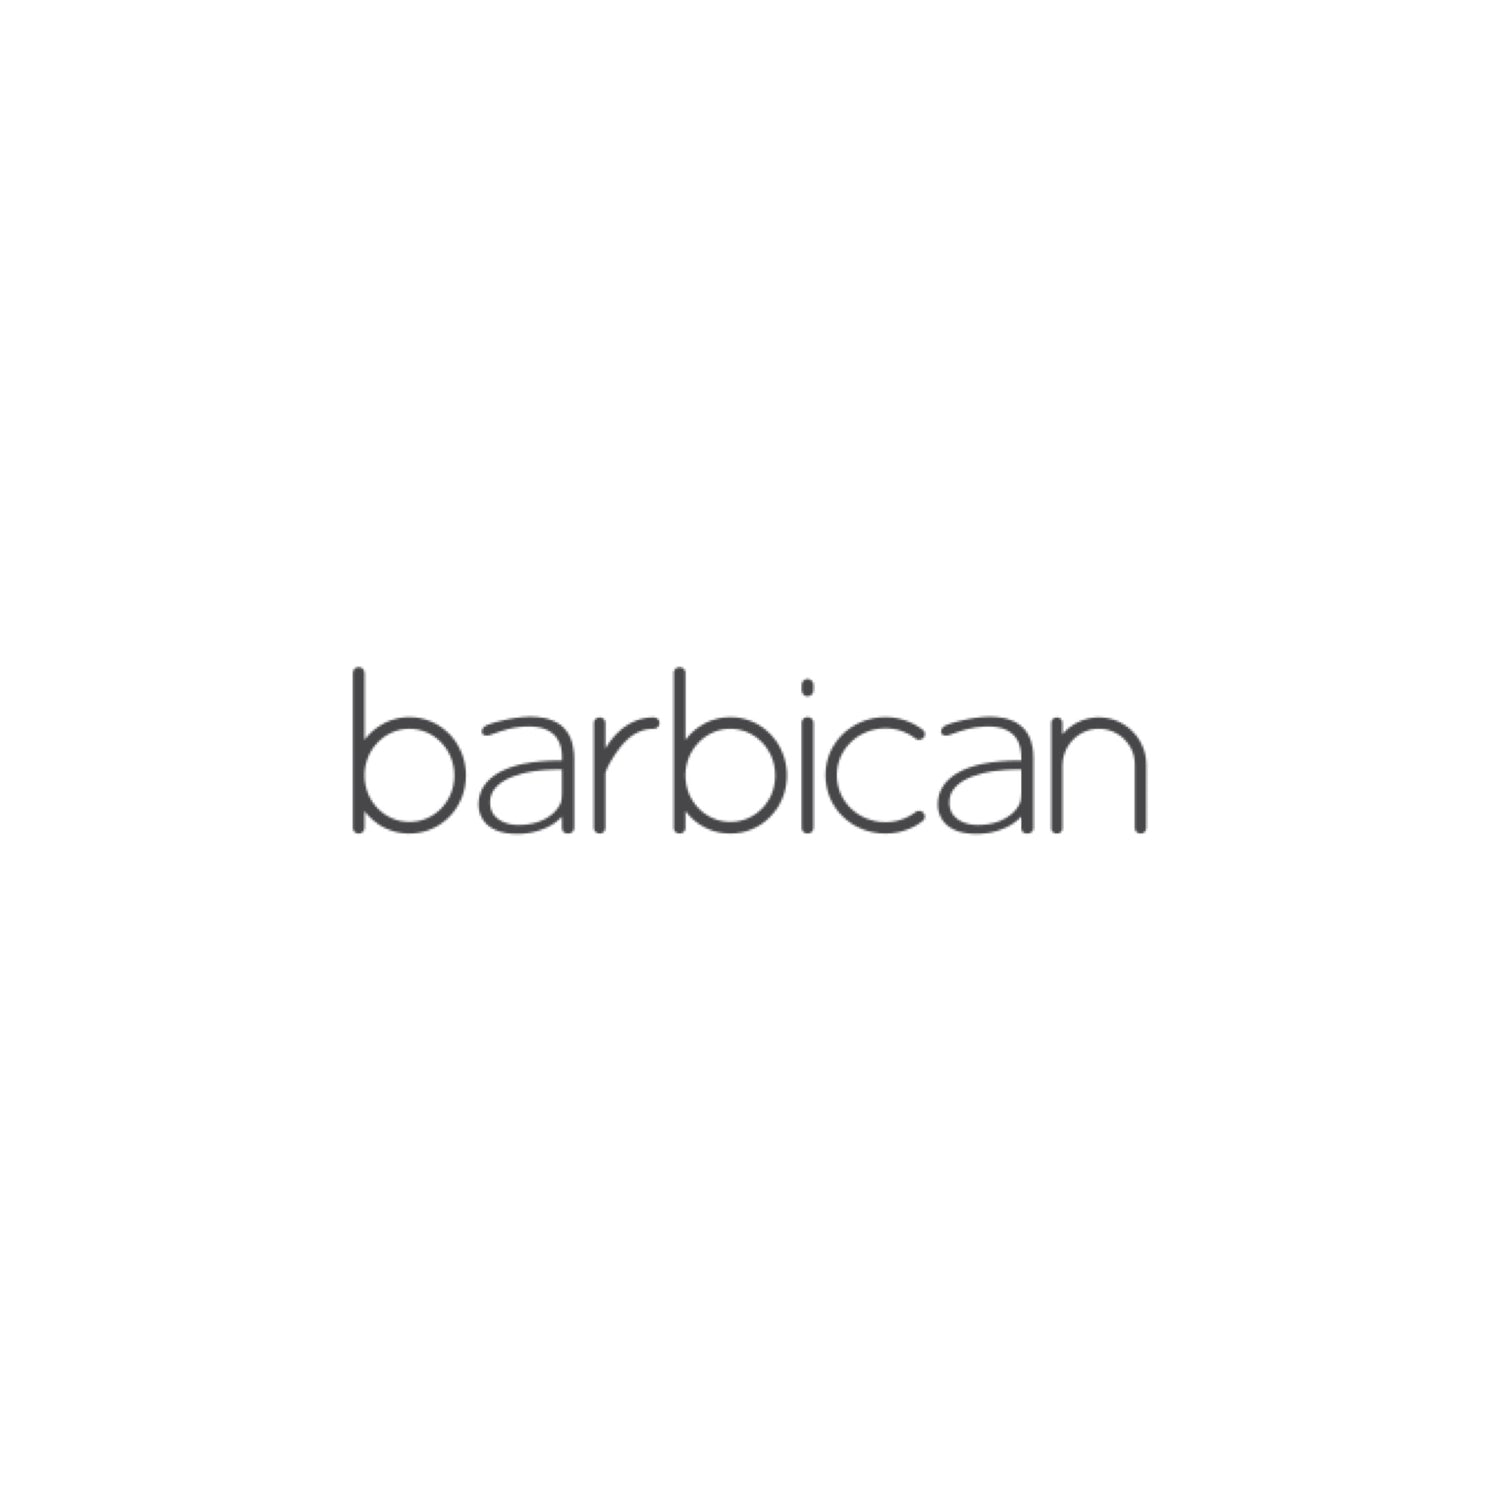 BARBICAN ARCHITECTURAL PRODUCTS LTD